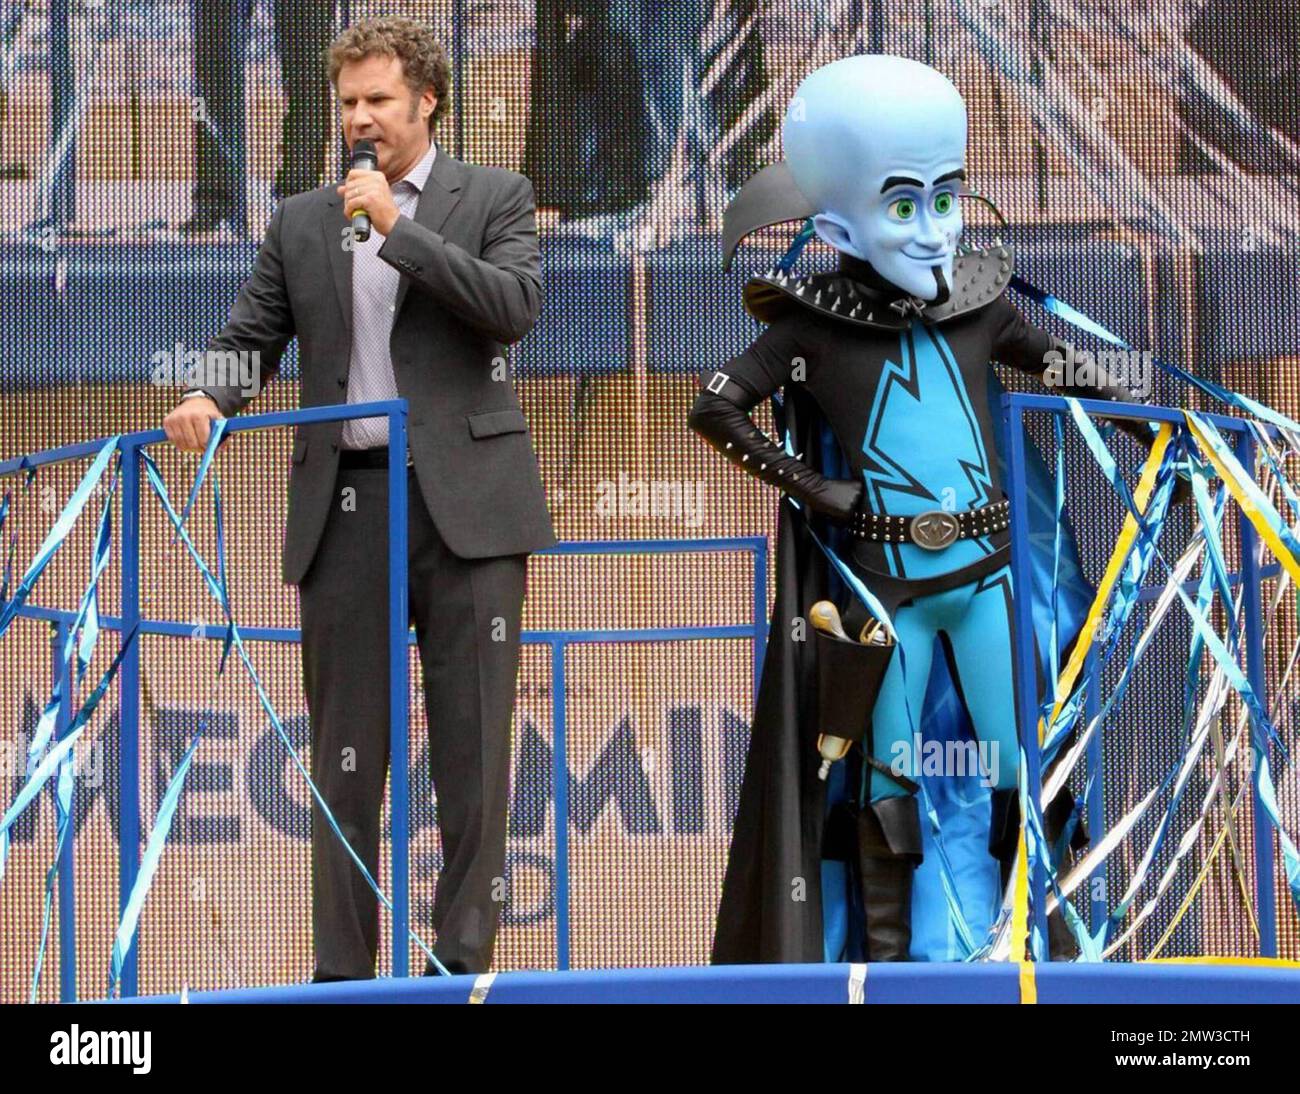 Comedic actor, writer and producer Will Ferrell raises the promotional ante as he and and more than 1500 costumed fans dressed as a comic, television and film superhero characters flooded Nokia Plaza L.A. Live in downtown LA during a rally organized and hosted by DreamWorks Animation.  The event aimed to break the Guinness World Records title for Largest Gathering of Superheroes in celebration of the release of Ferrell and DreamWorks' new animation 'Megamind' co-starring Brad Pitt and Tina Fey.  A minimum of 1501 superheroes were needed in order to break the record which DreamWorks Animation d Stock Photo